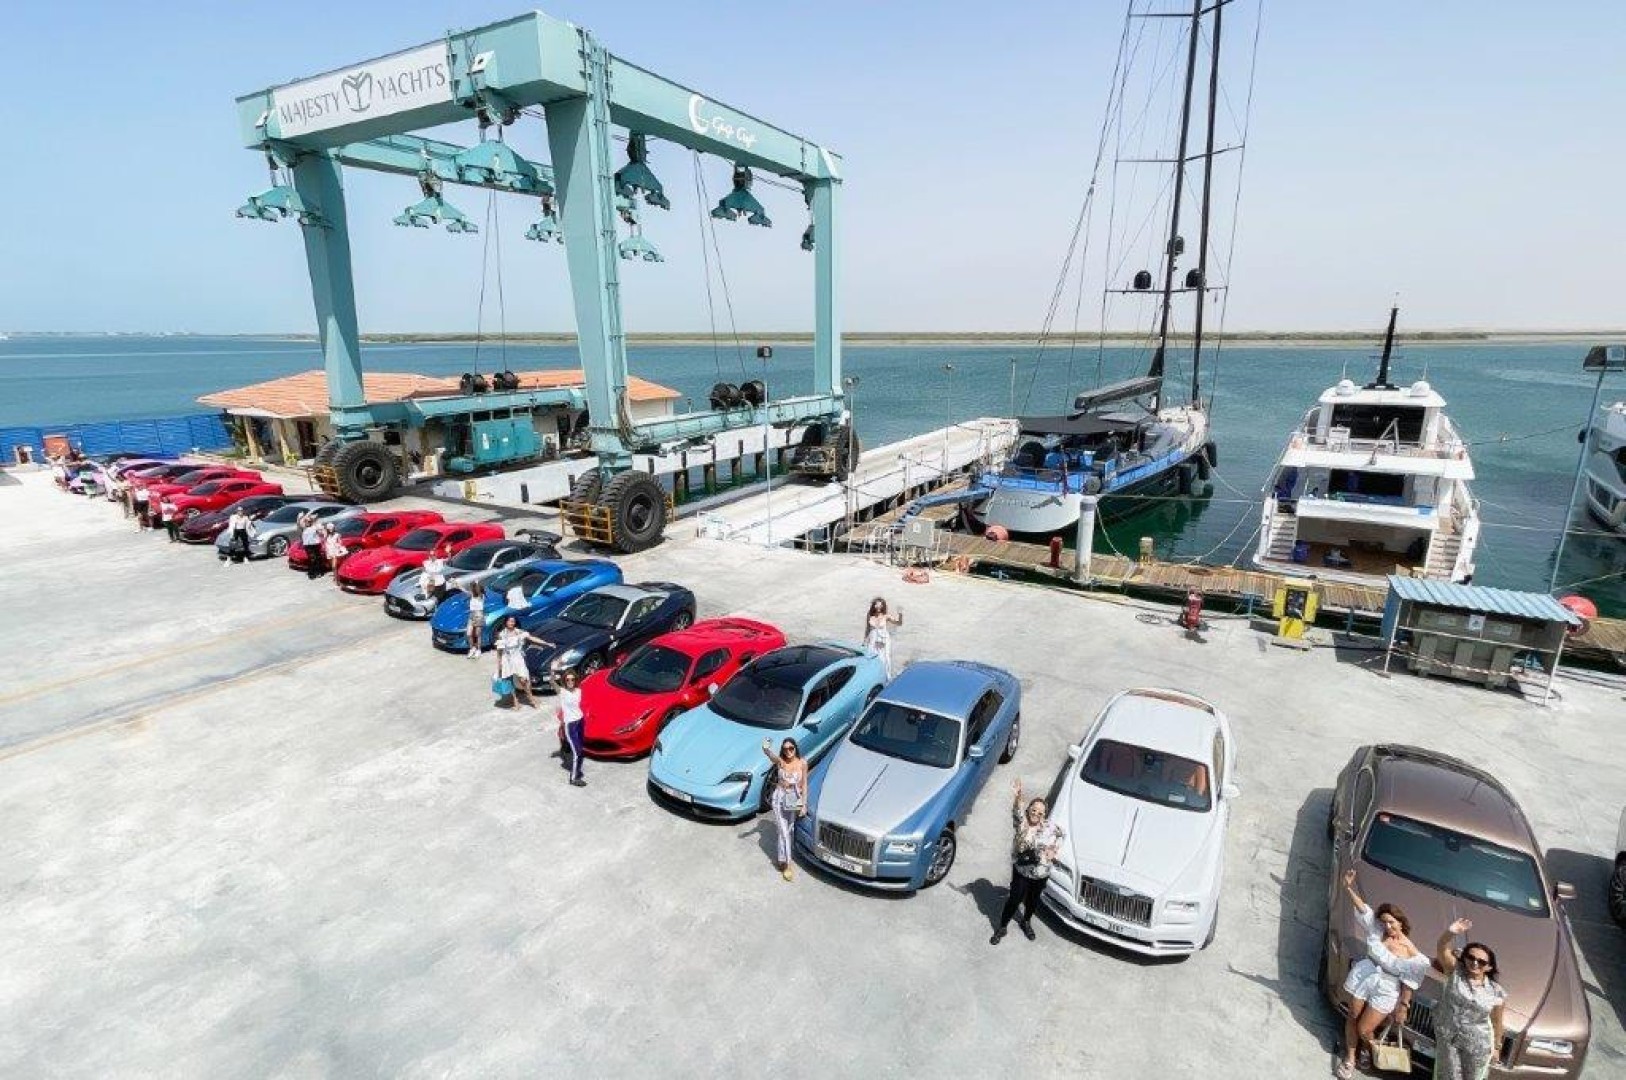 Gulf Craft hosts  celebratory drive with the Arabian Gazelles - the world’s only female supercar club